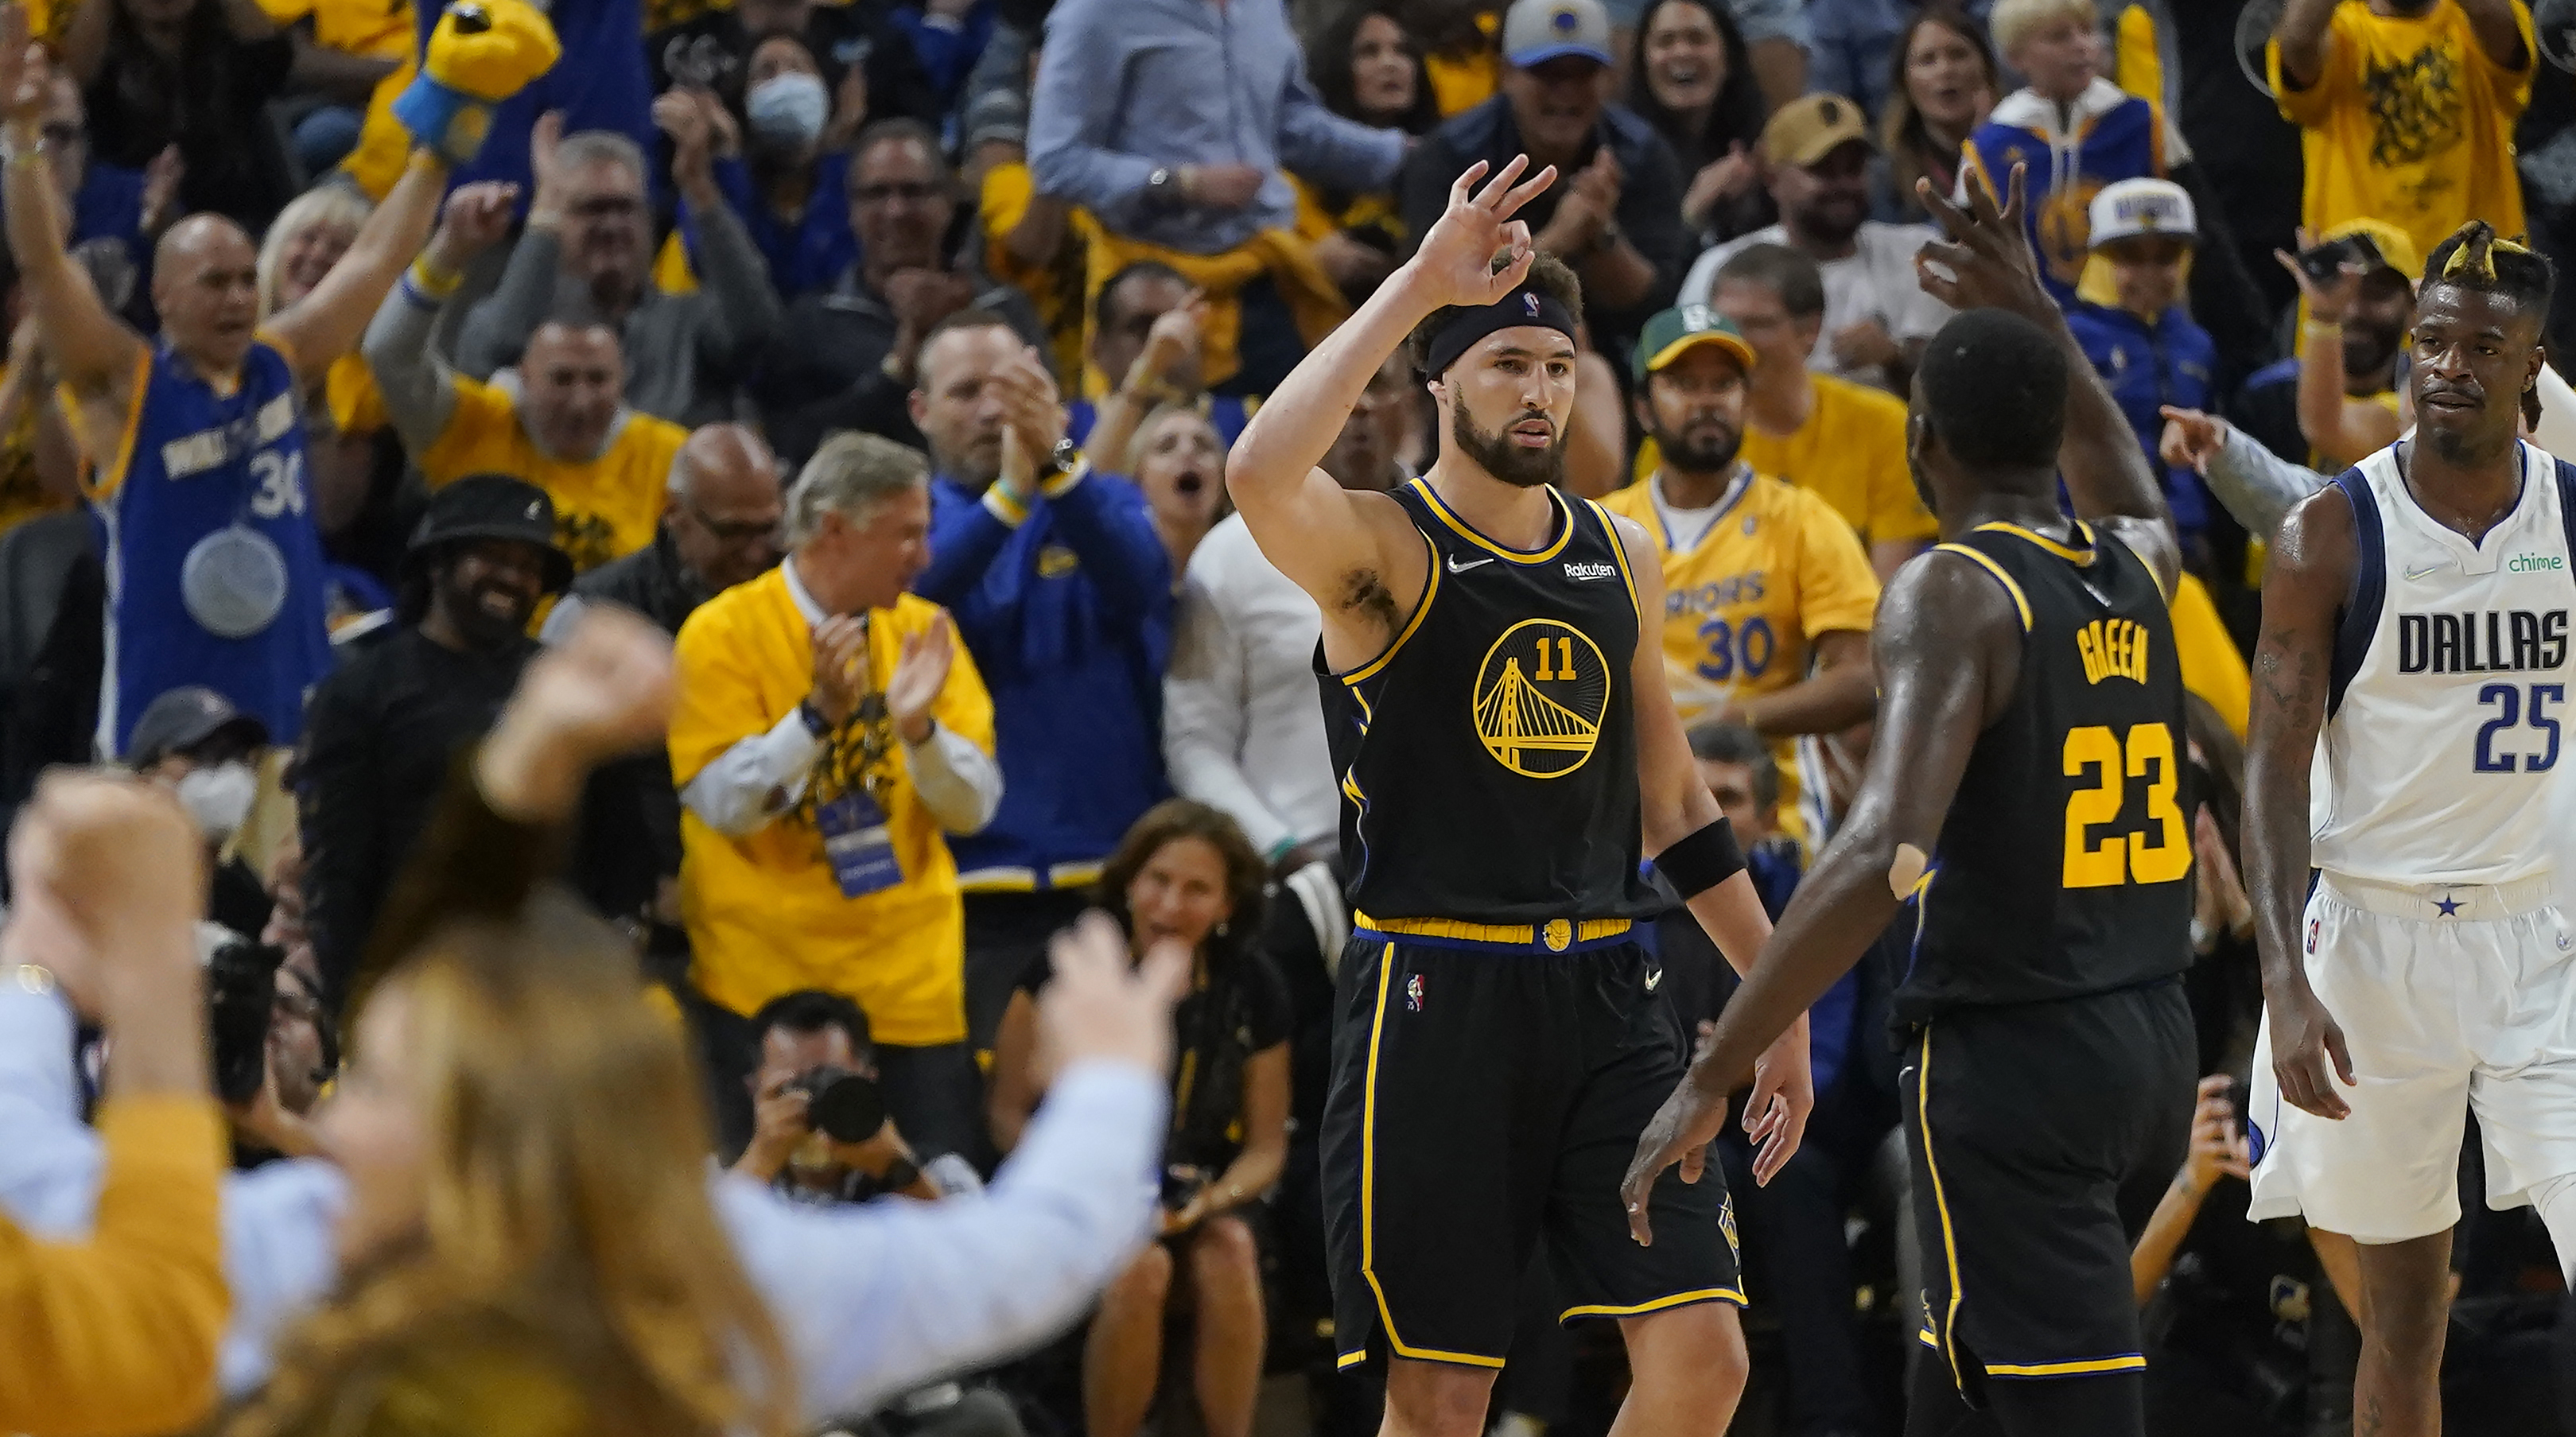 Warriors: Why Klay Thompson wore a Cowboys jersey before Mavs clash